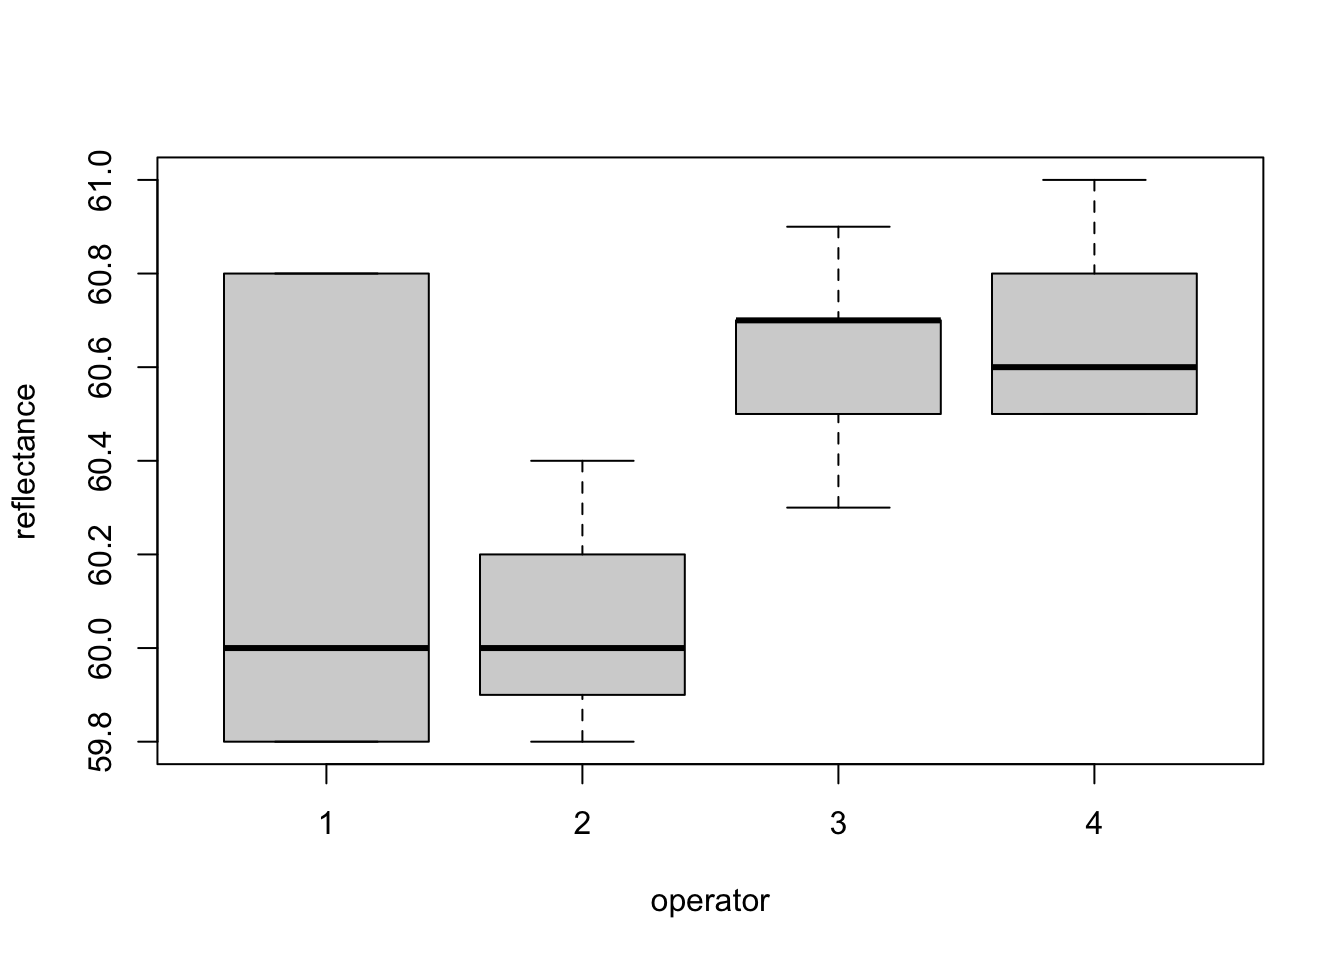 Pulp experiment: distributions of reflectance from the four operators.